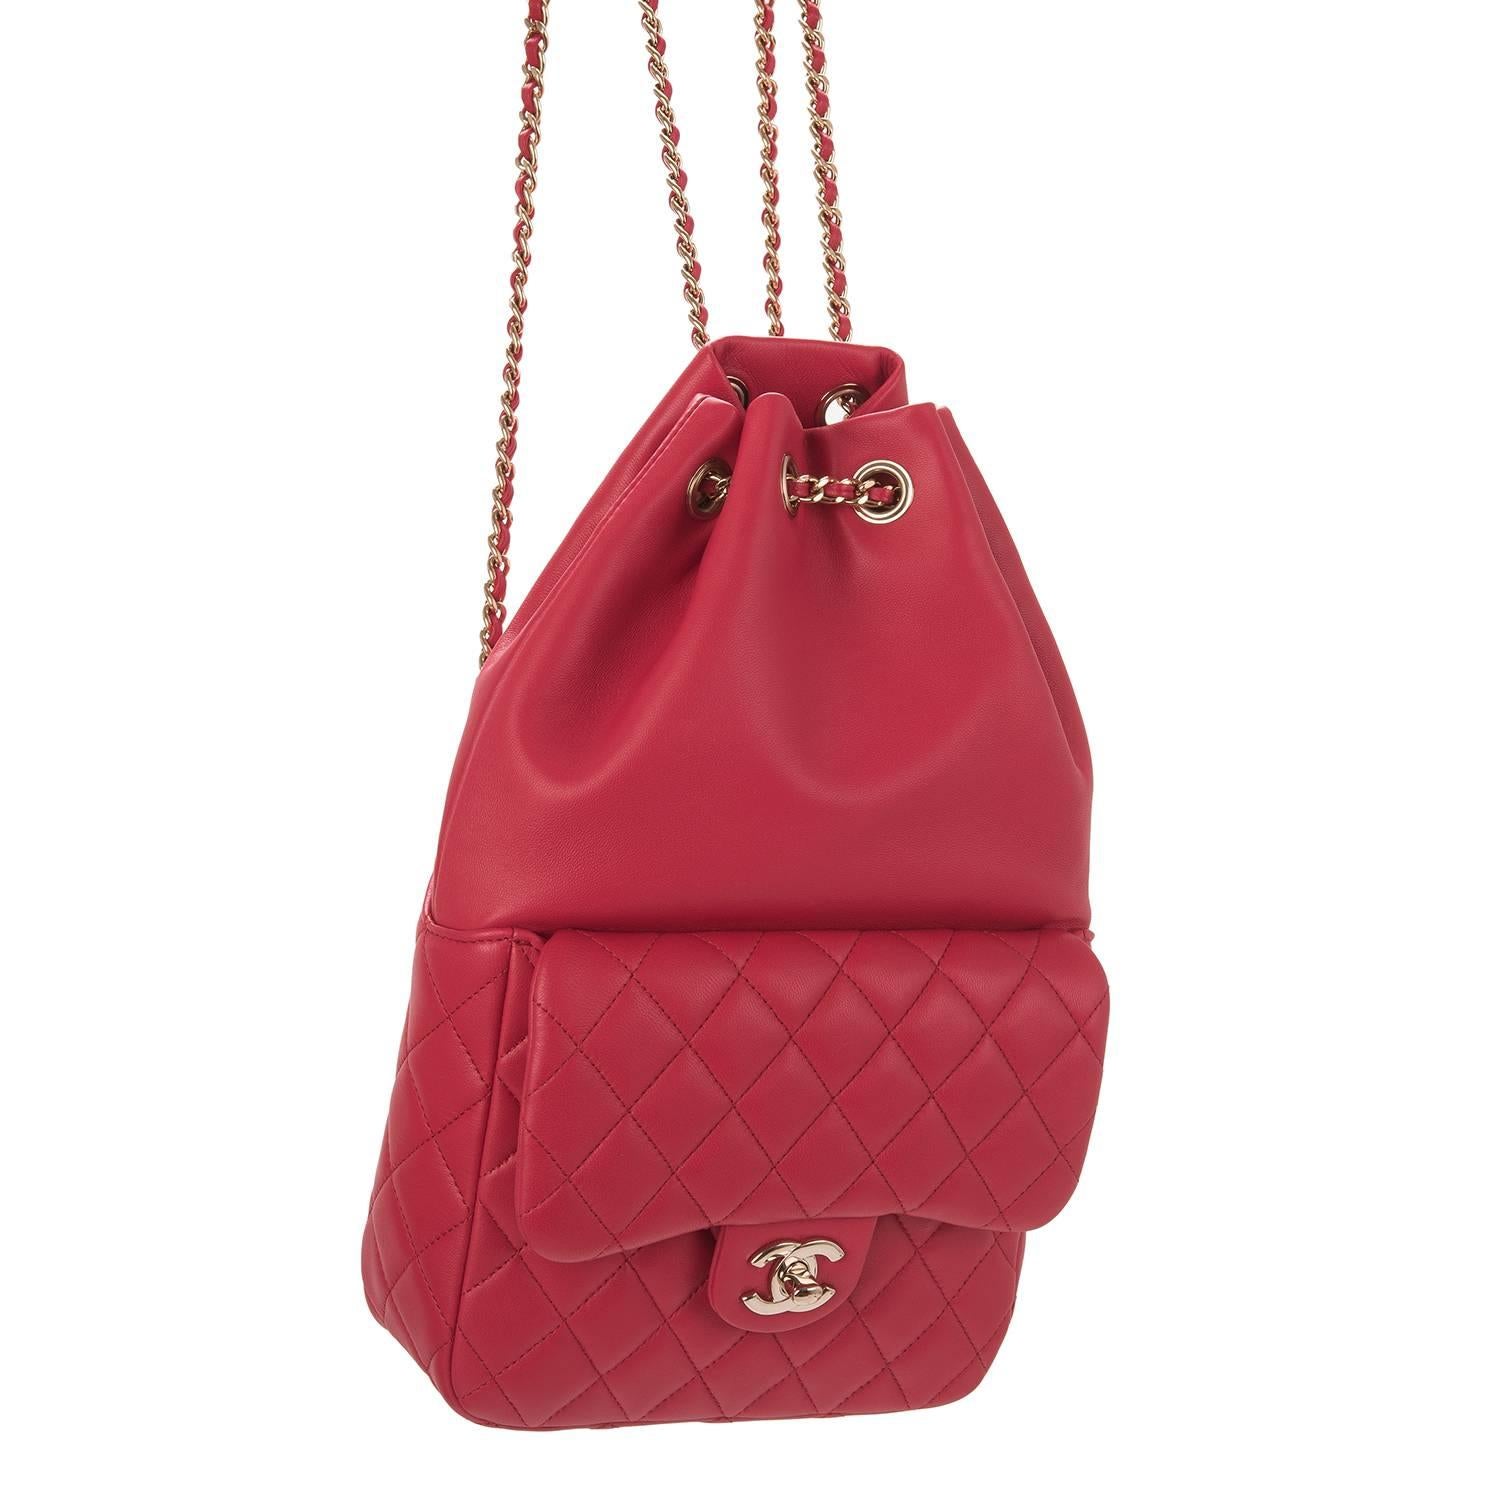 Chanel Red Lambskin Flap Backpack For Sale 1